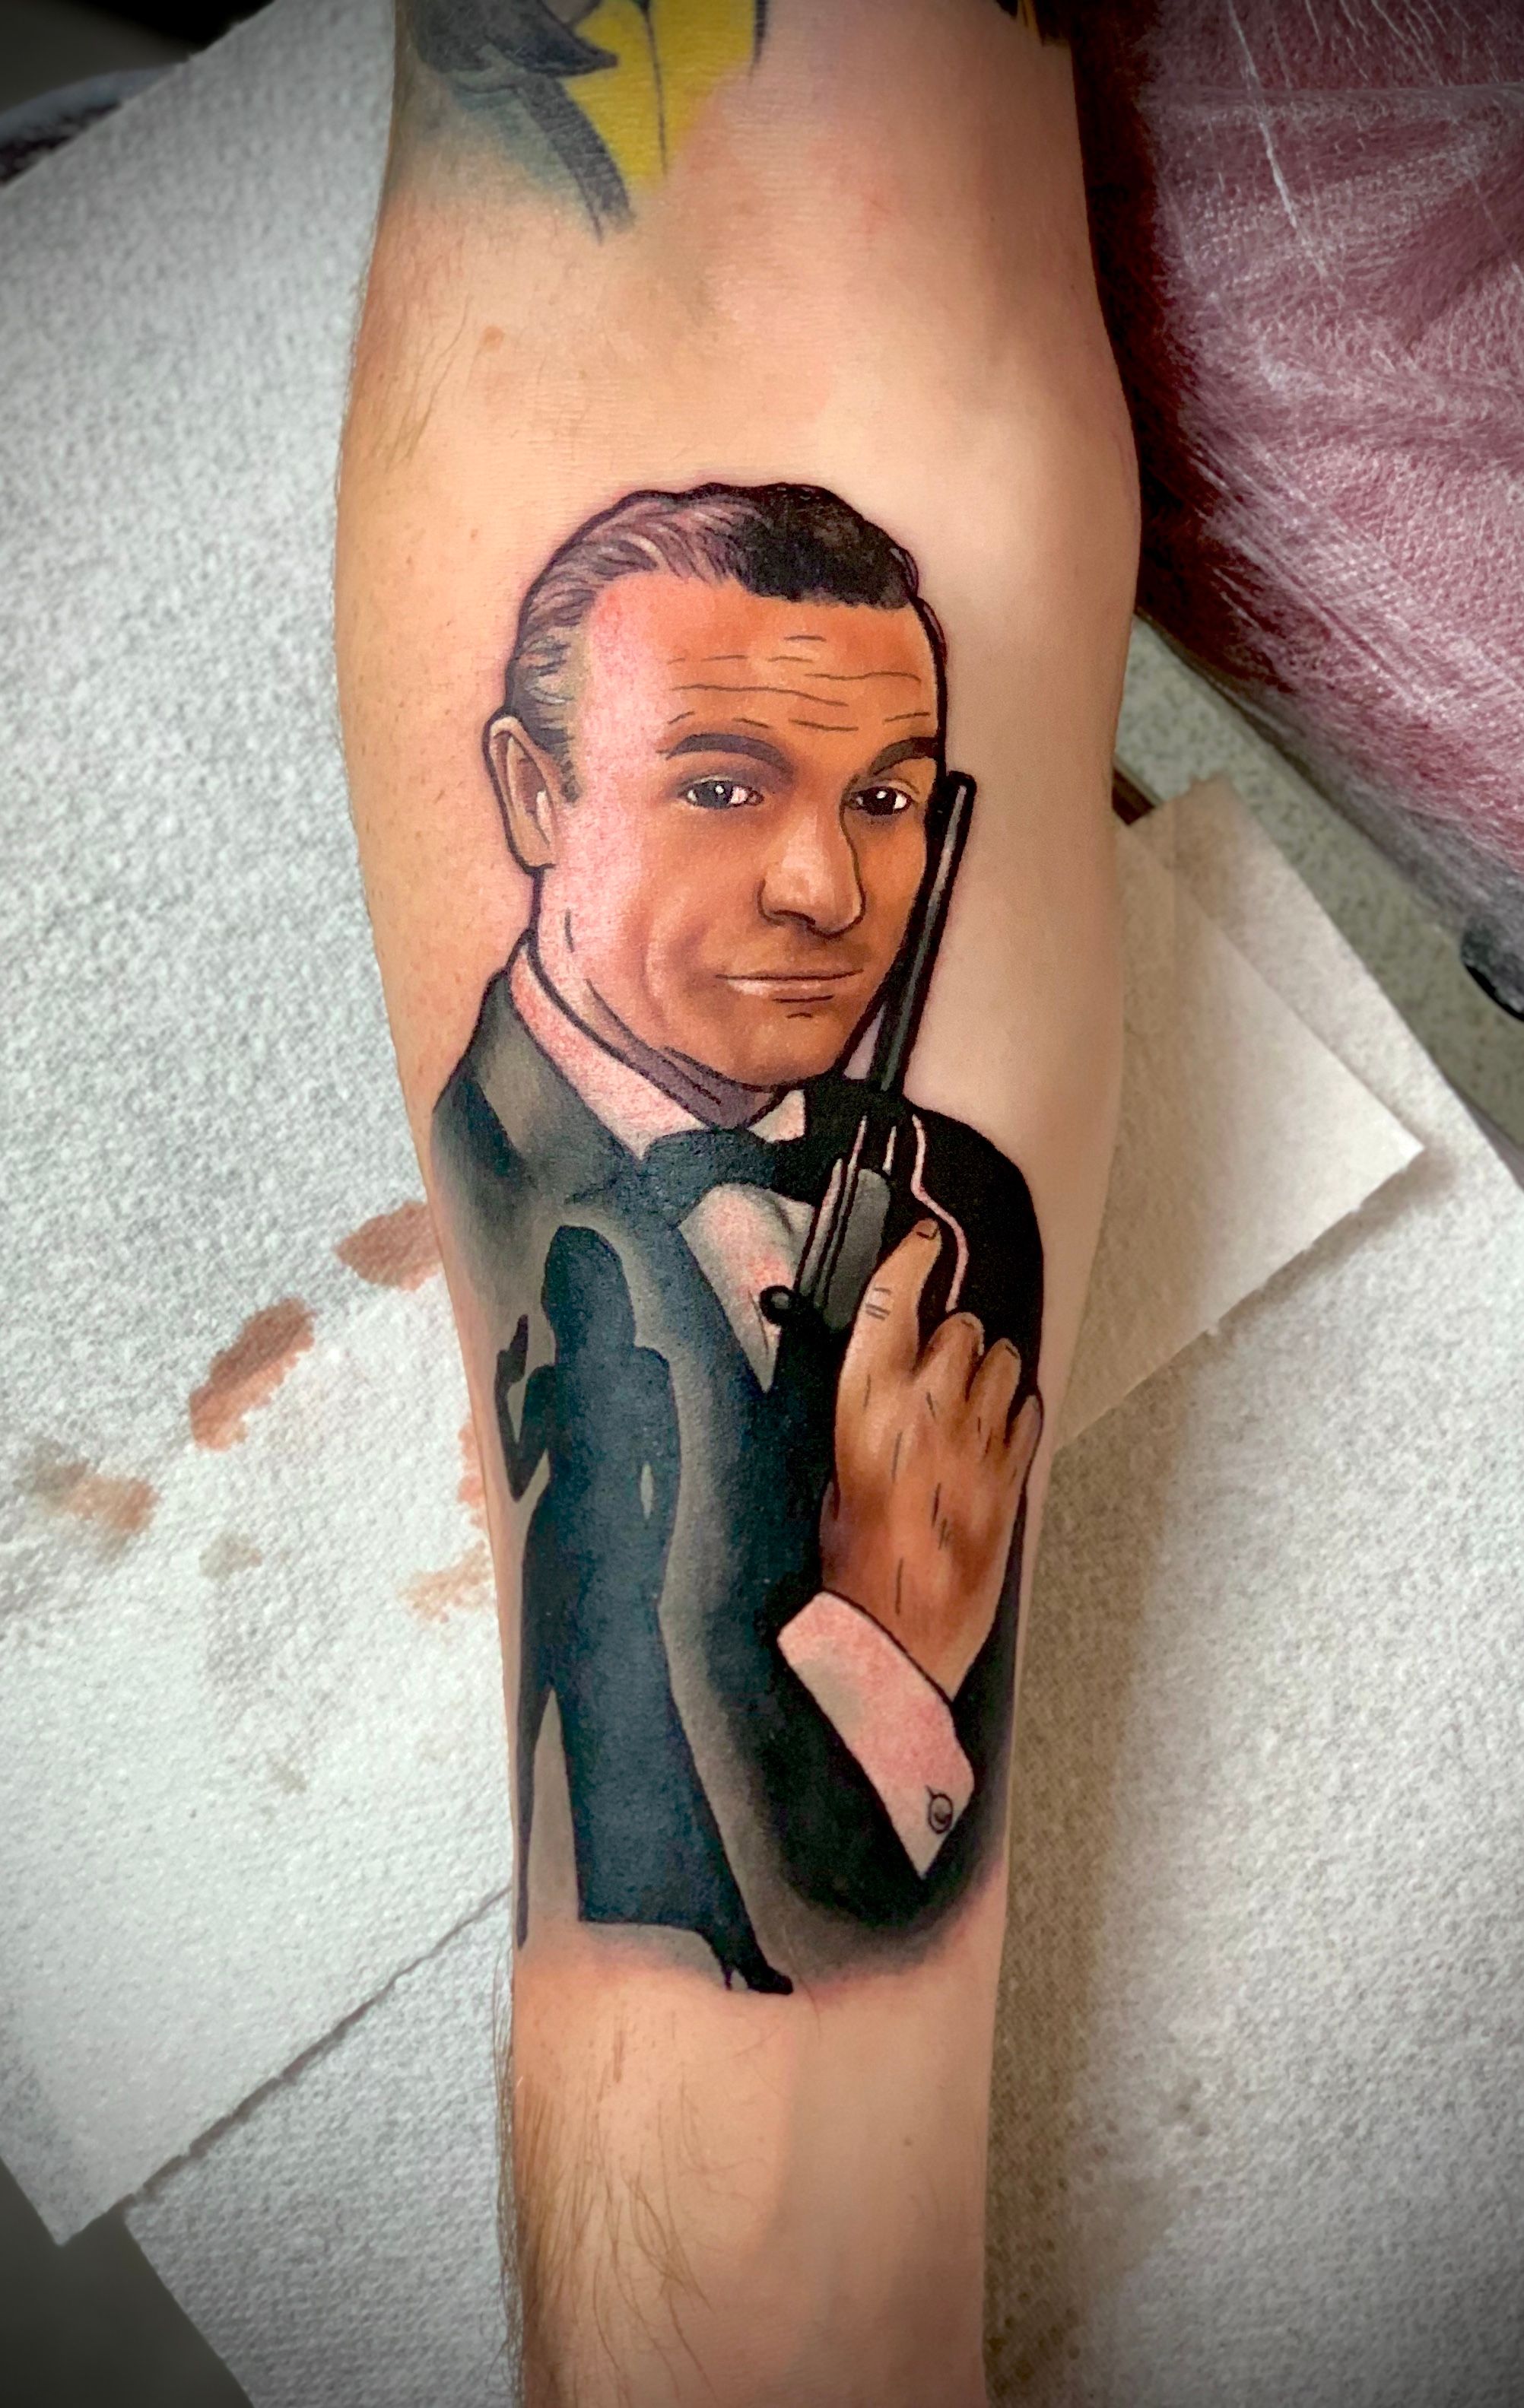 Dotwork style Sean Connery as James Bond tattoo on the